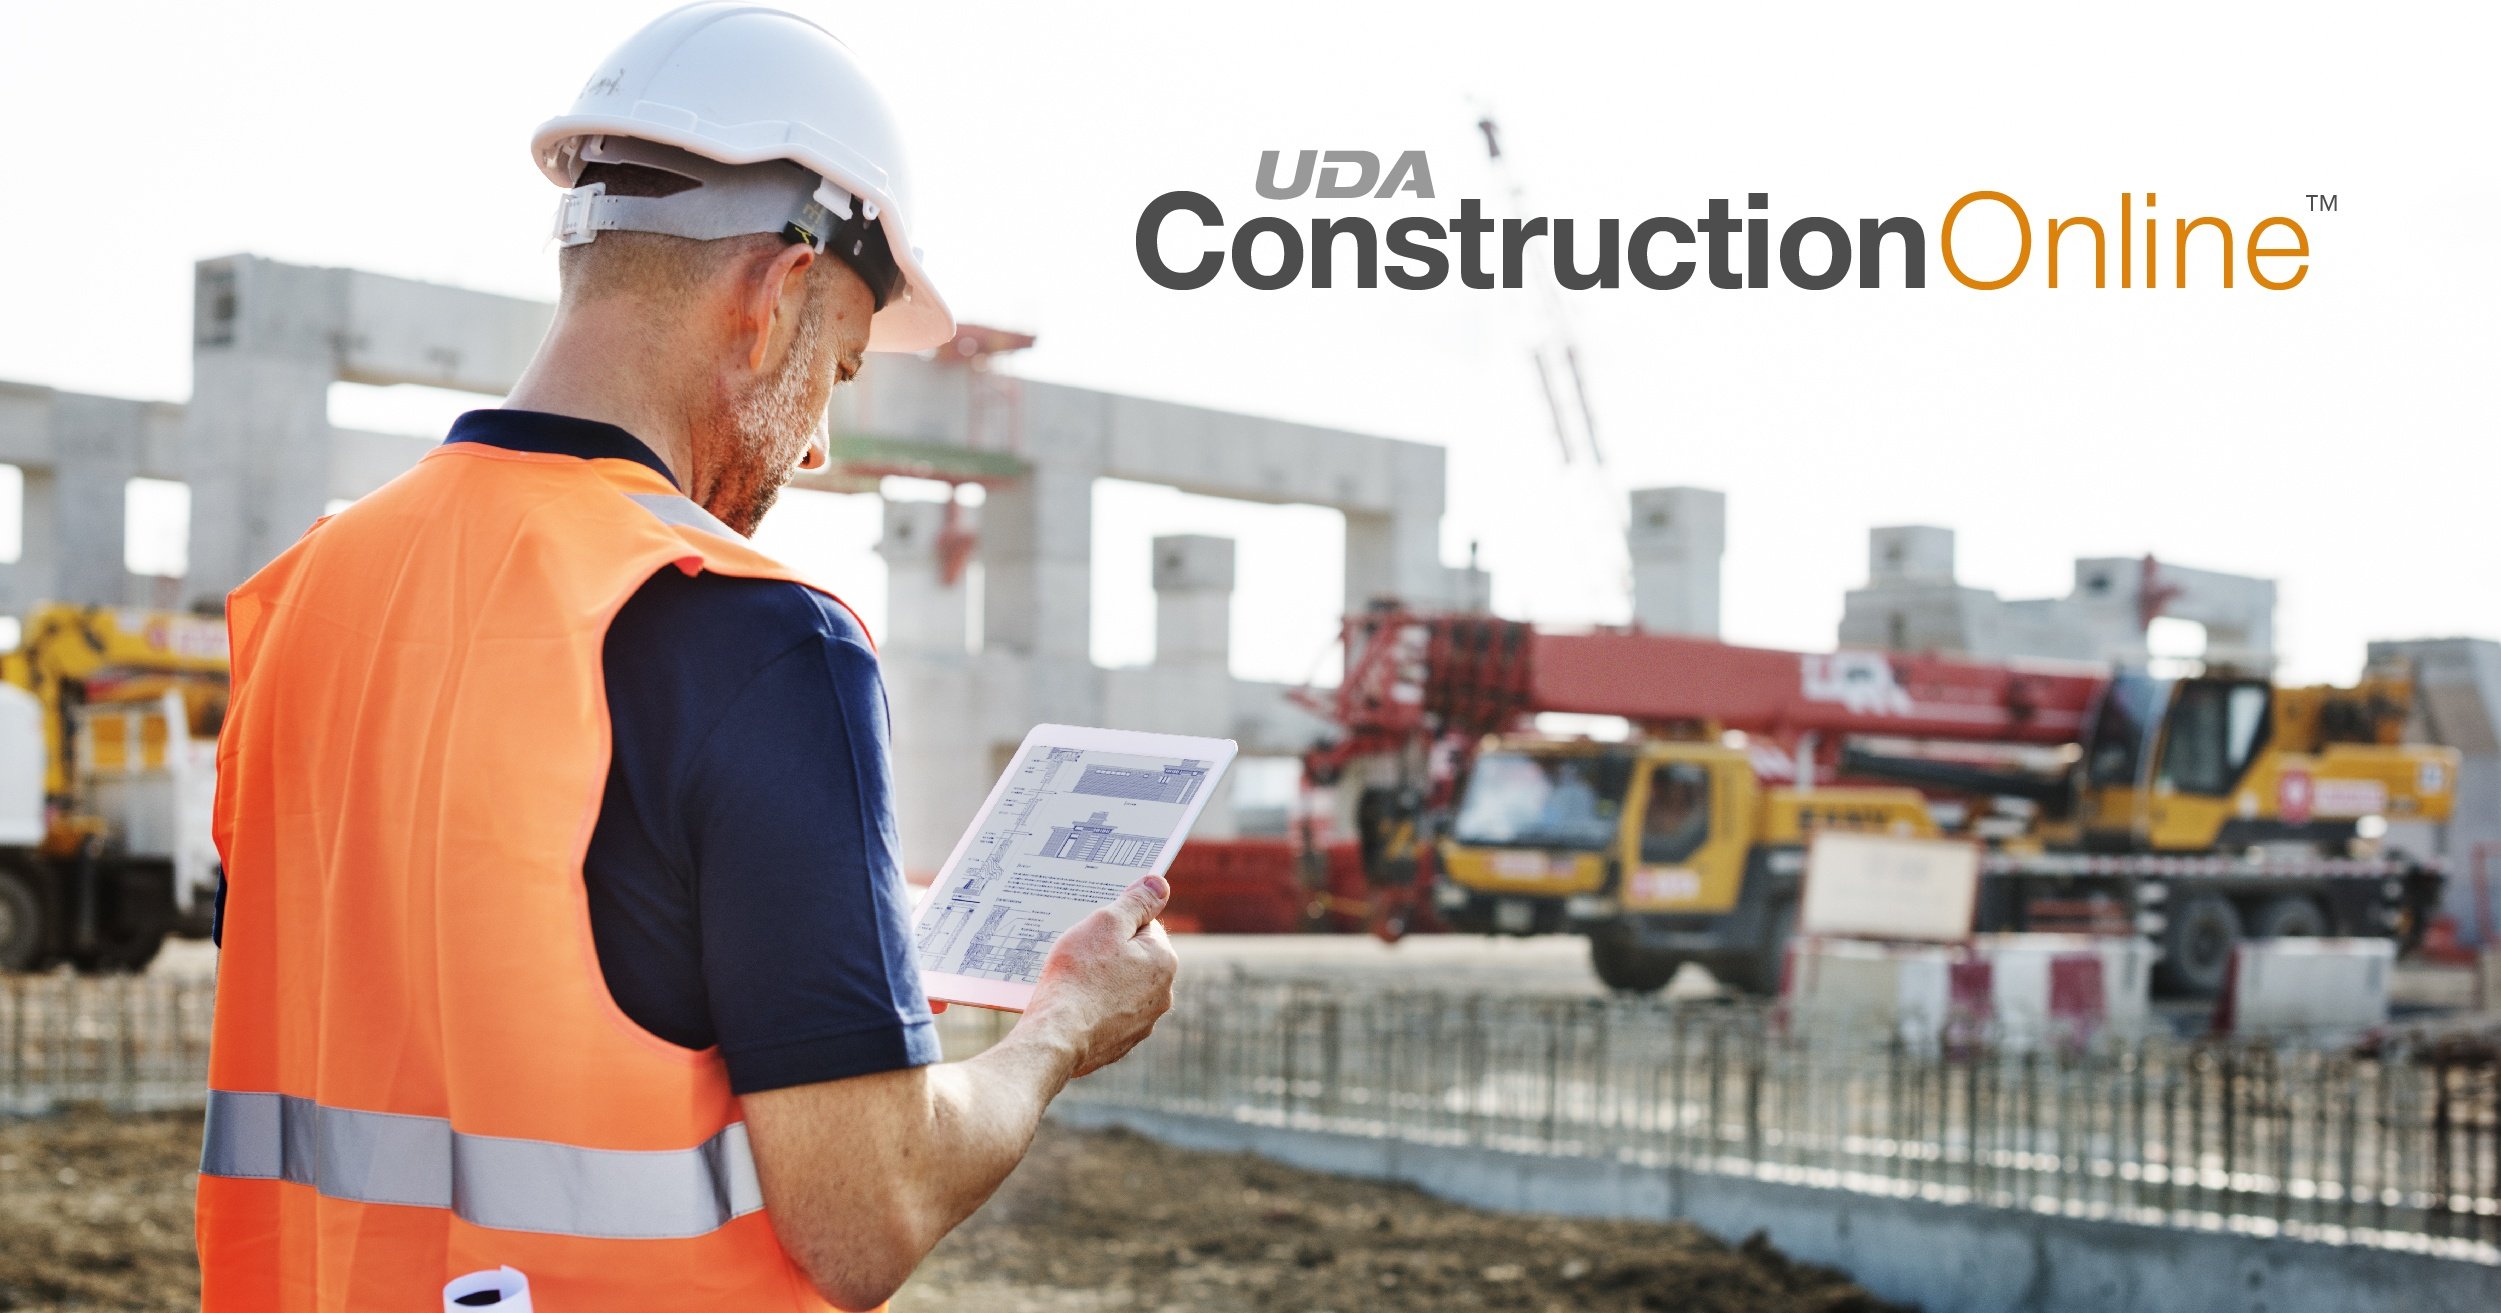 4 Ways to Impress Your Boss by Using ConstructionOnline From The Field